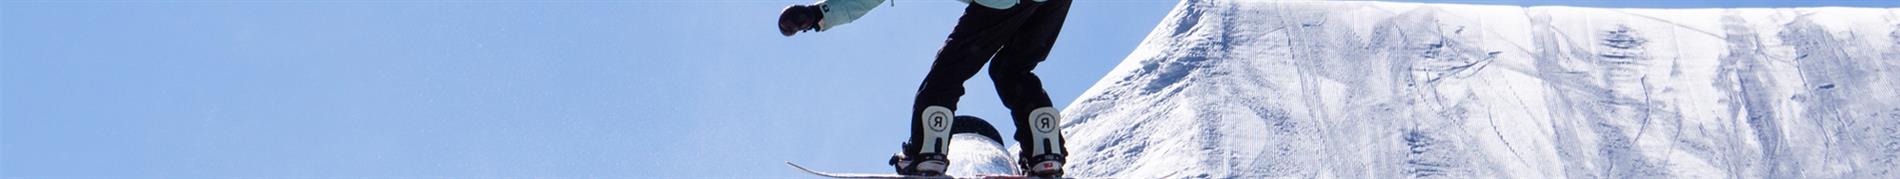 686 Women's Snowboard Pants: Warm, Waterproof and Awesome 